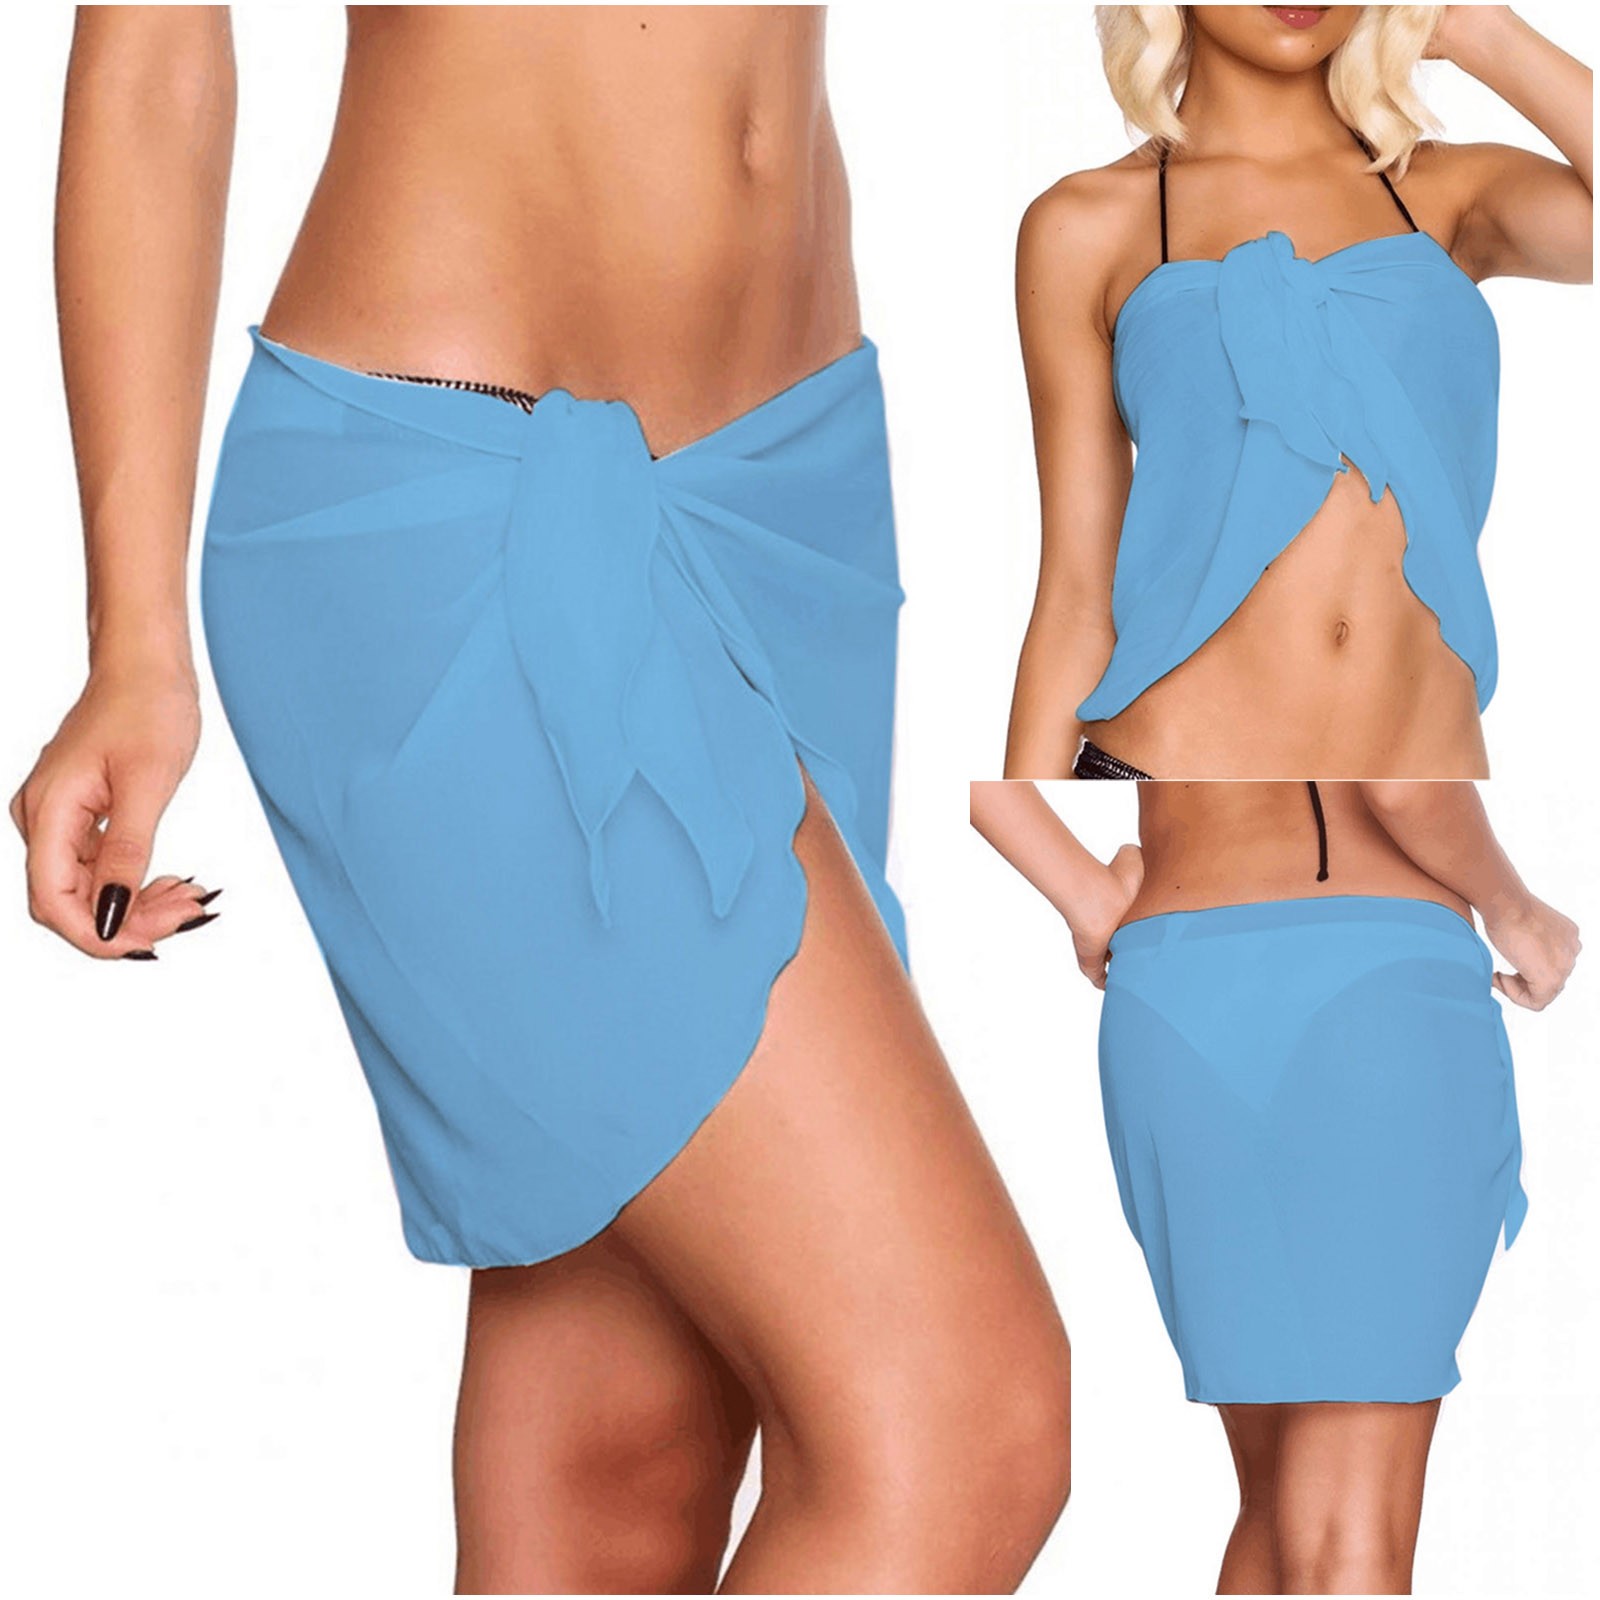 Bluelansie Women's Sexy Solid Color Beach Skirt Swimwear Cover Up